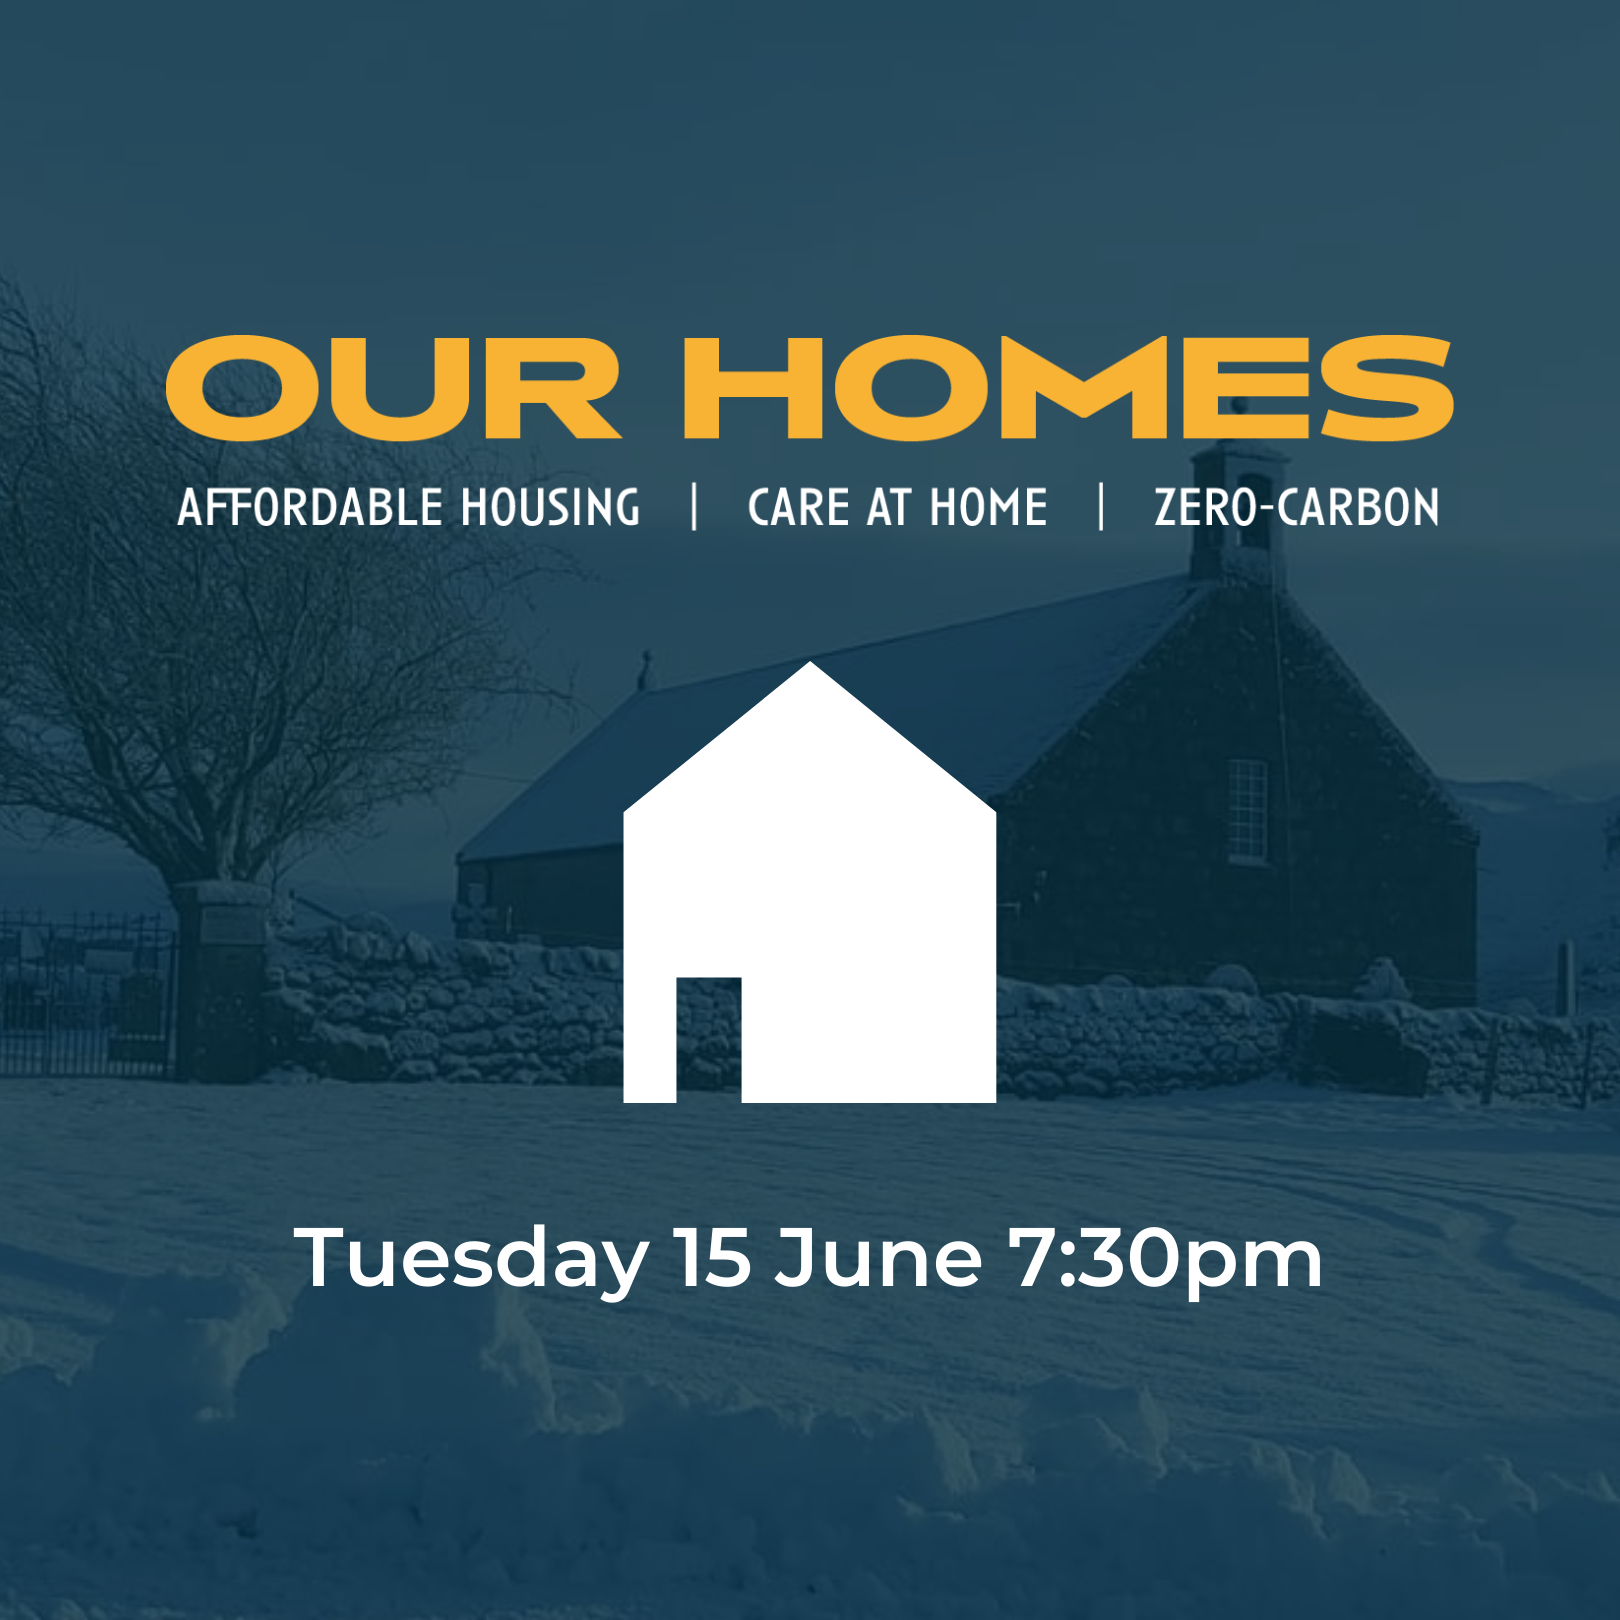 Zoom details: our homes workshop tuesday 15 june 7:30pm